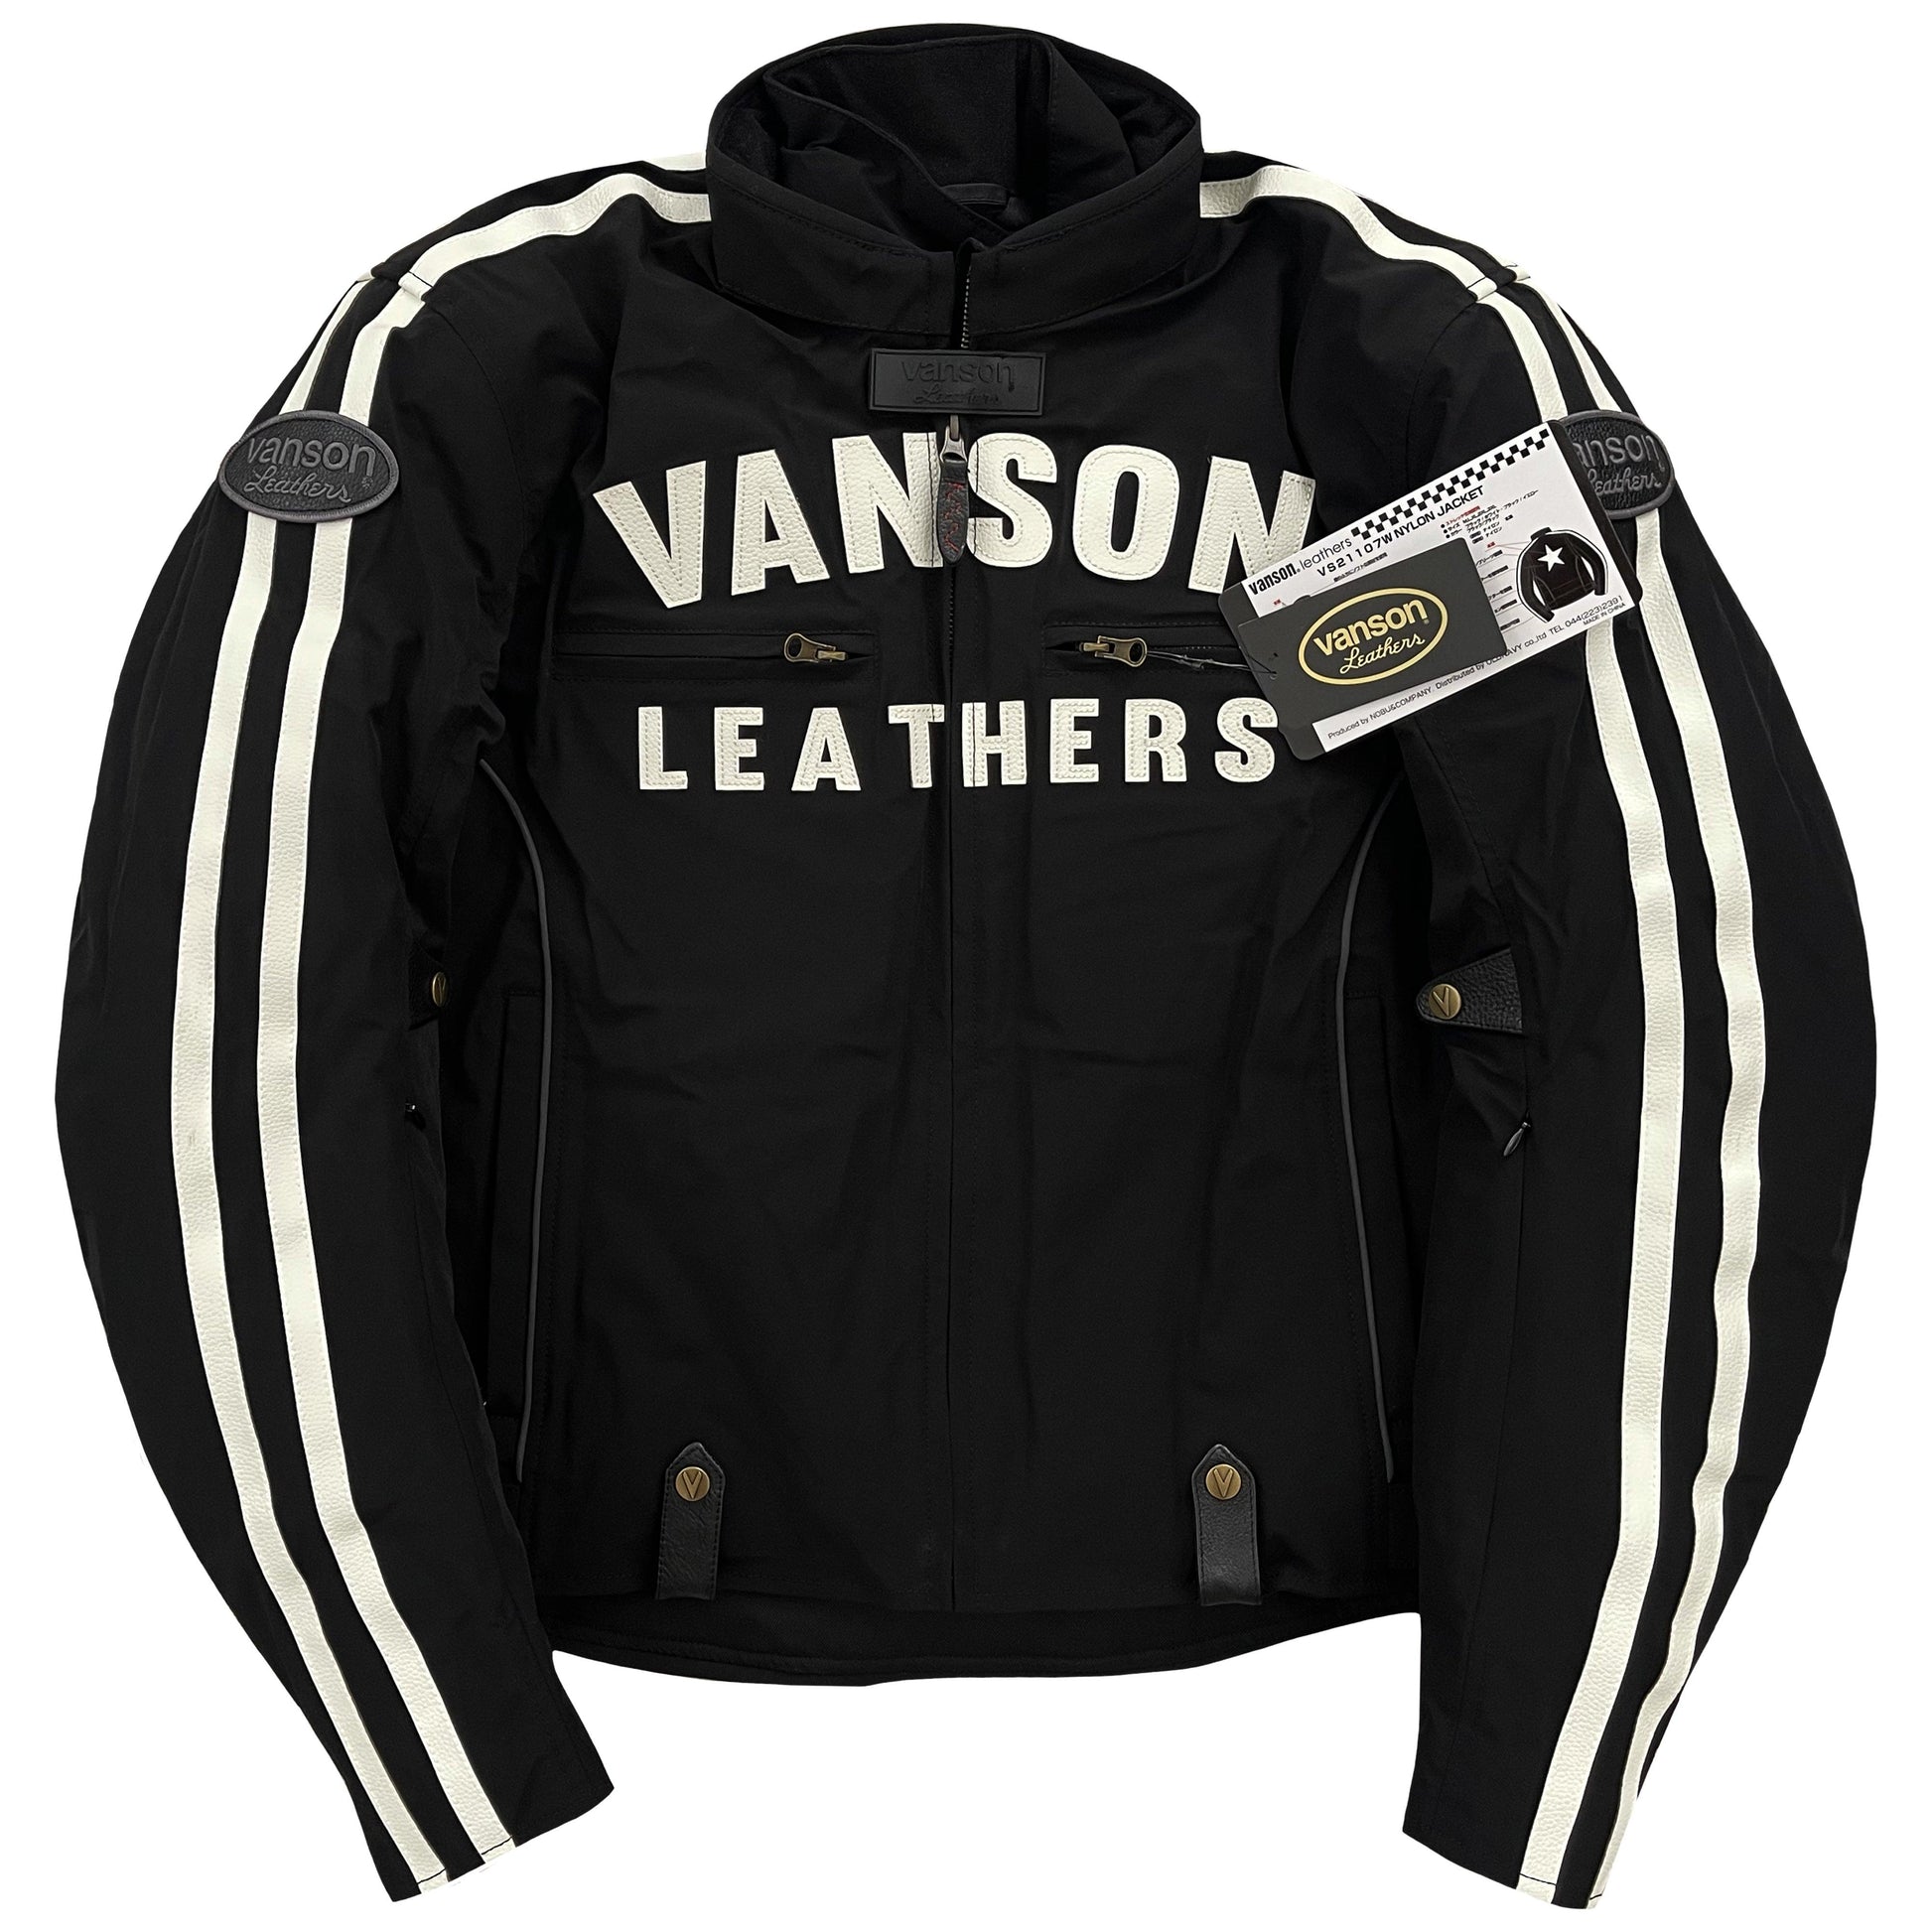 Vanson Leathers Motorcycle Racer Jacket - Known Source